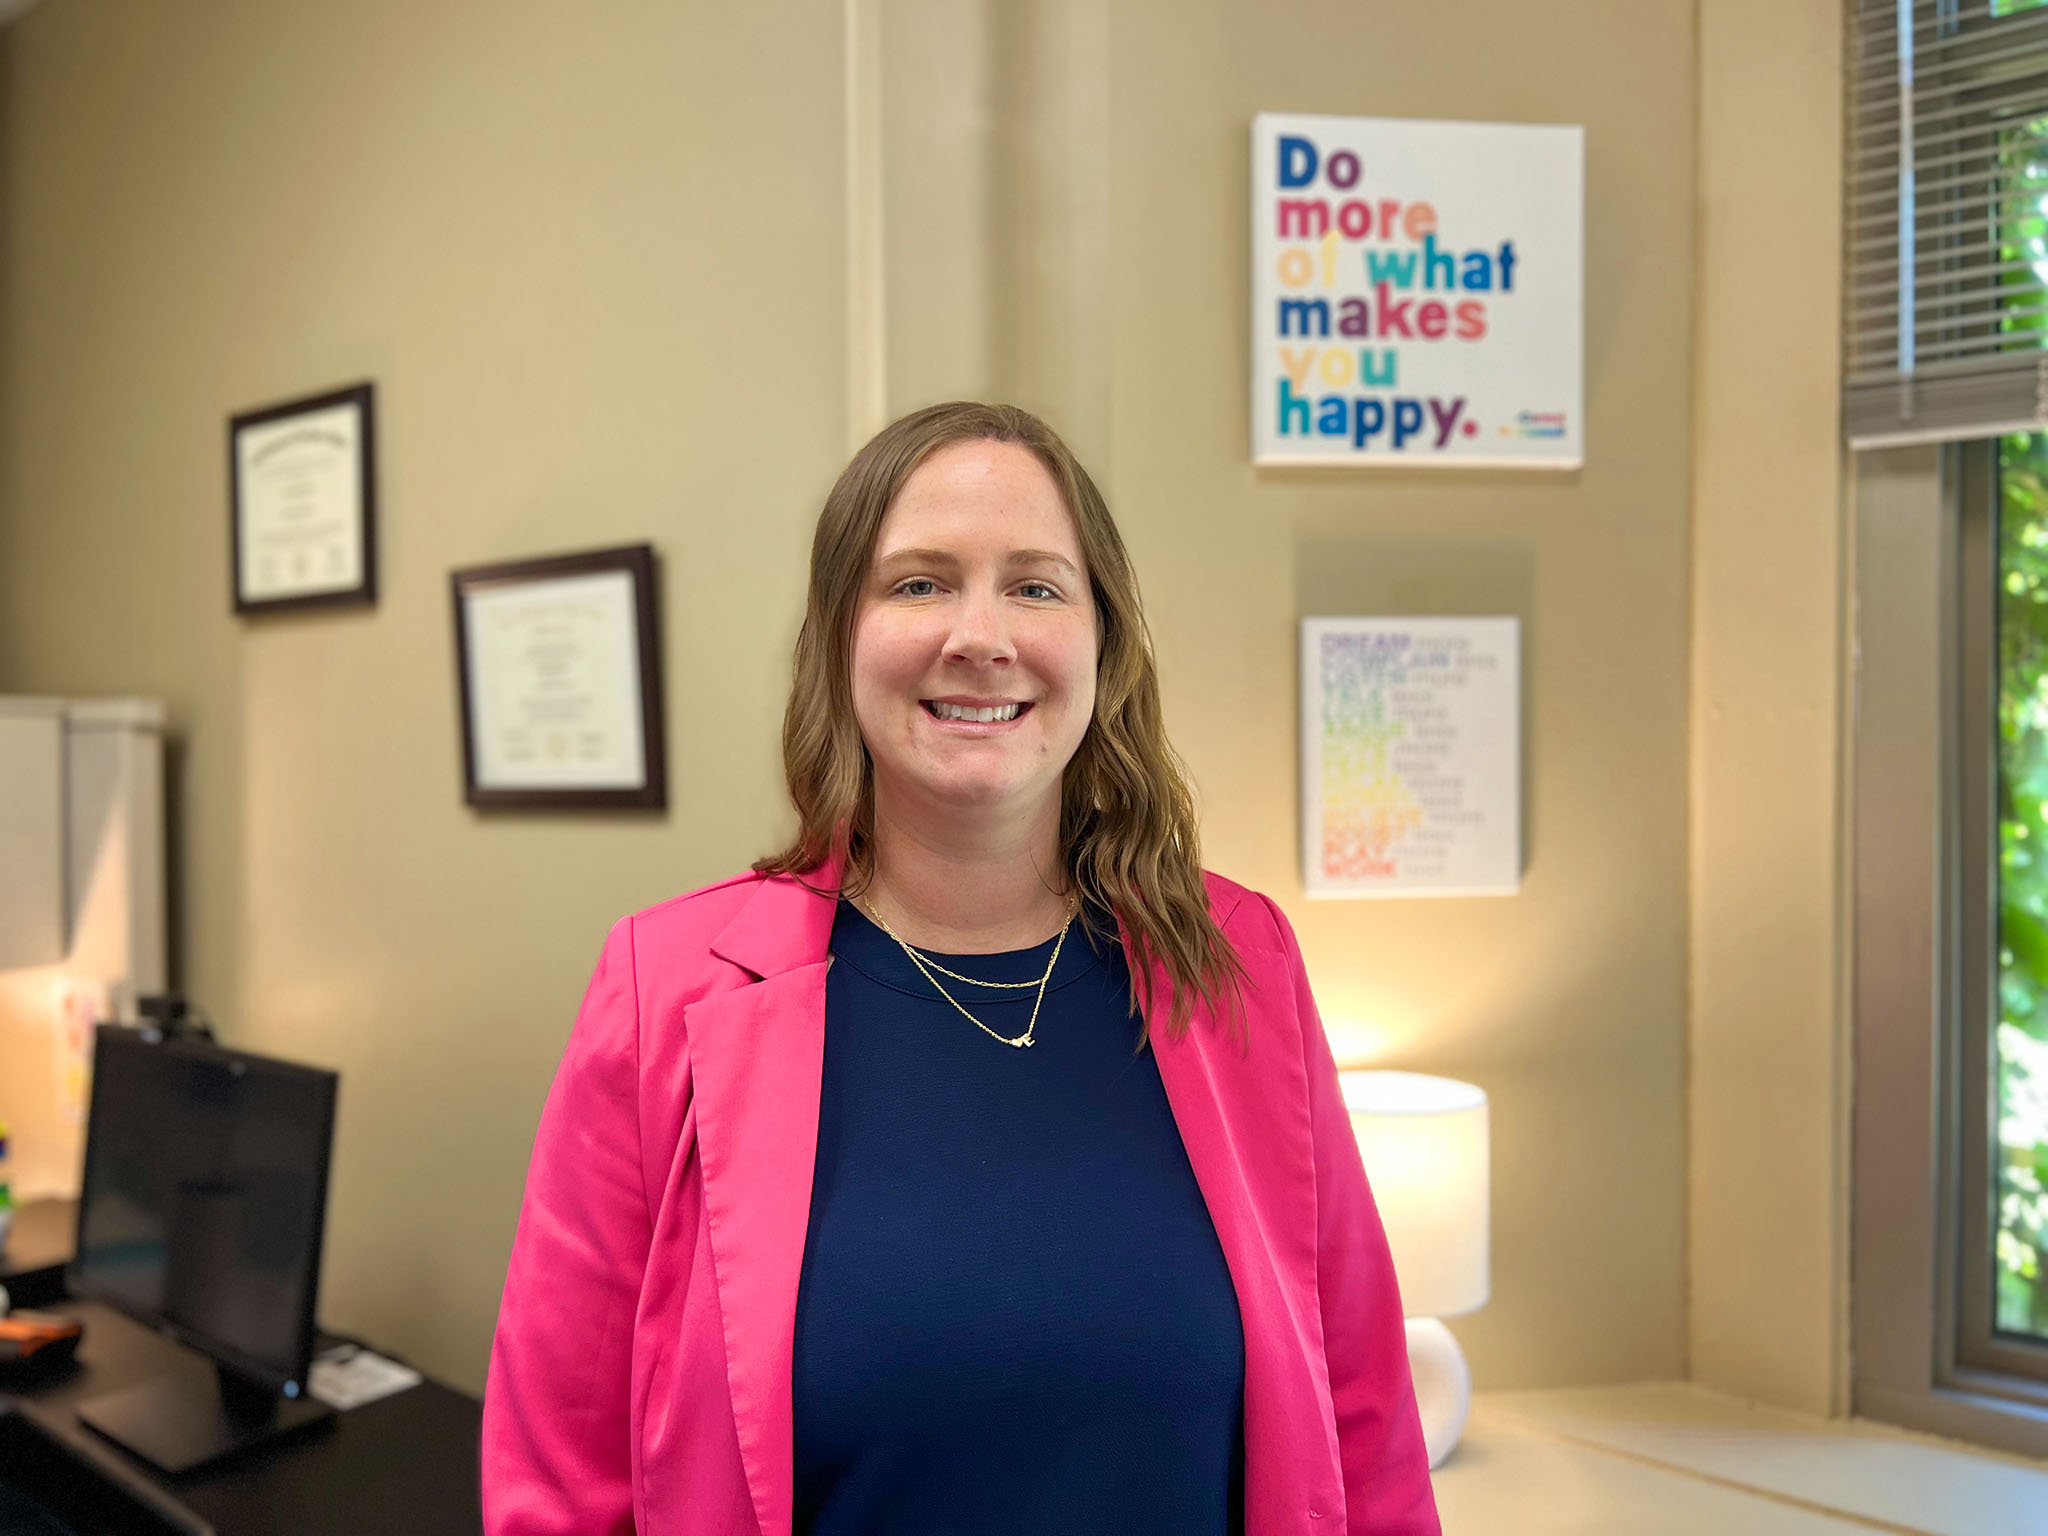 Woman in blue shirt and pink jacket standing in an office with a sign in background that says Do more of what makes you happy.